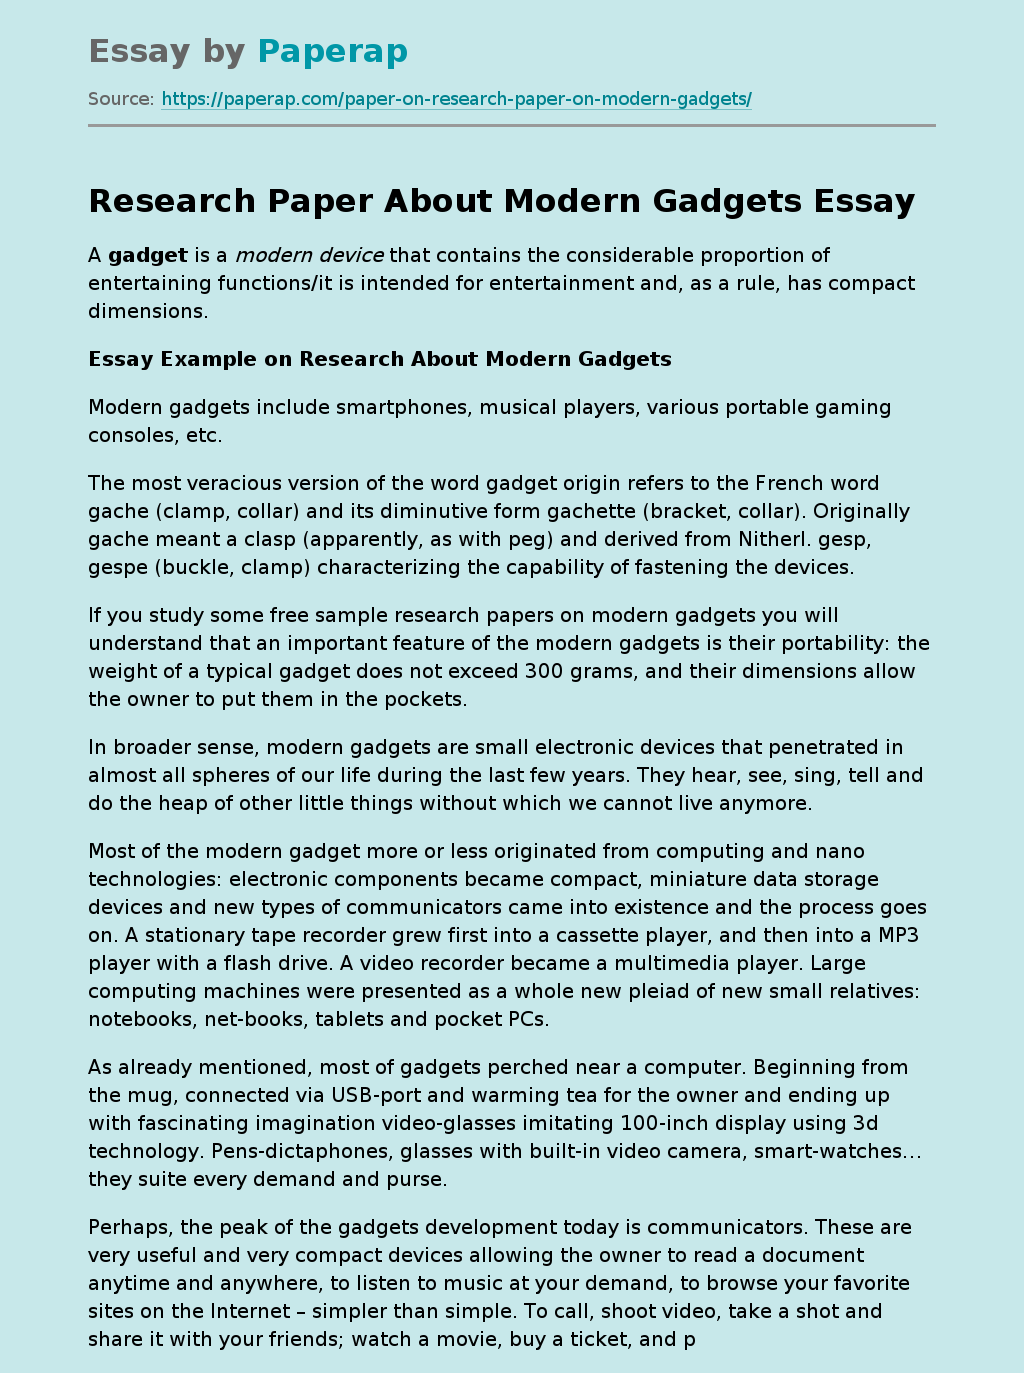 Research Paper About Modern Gadgets